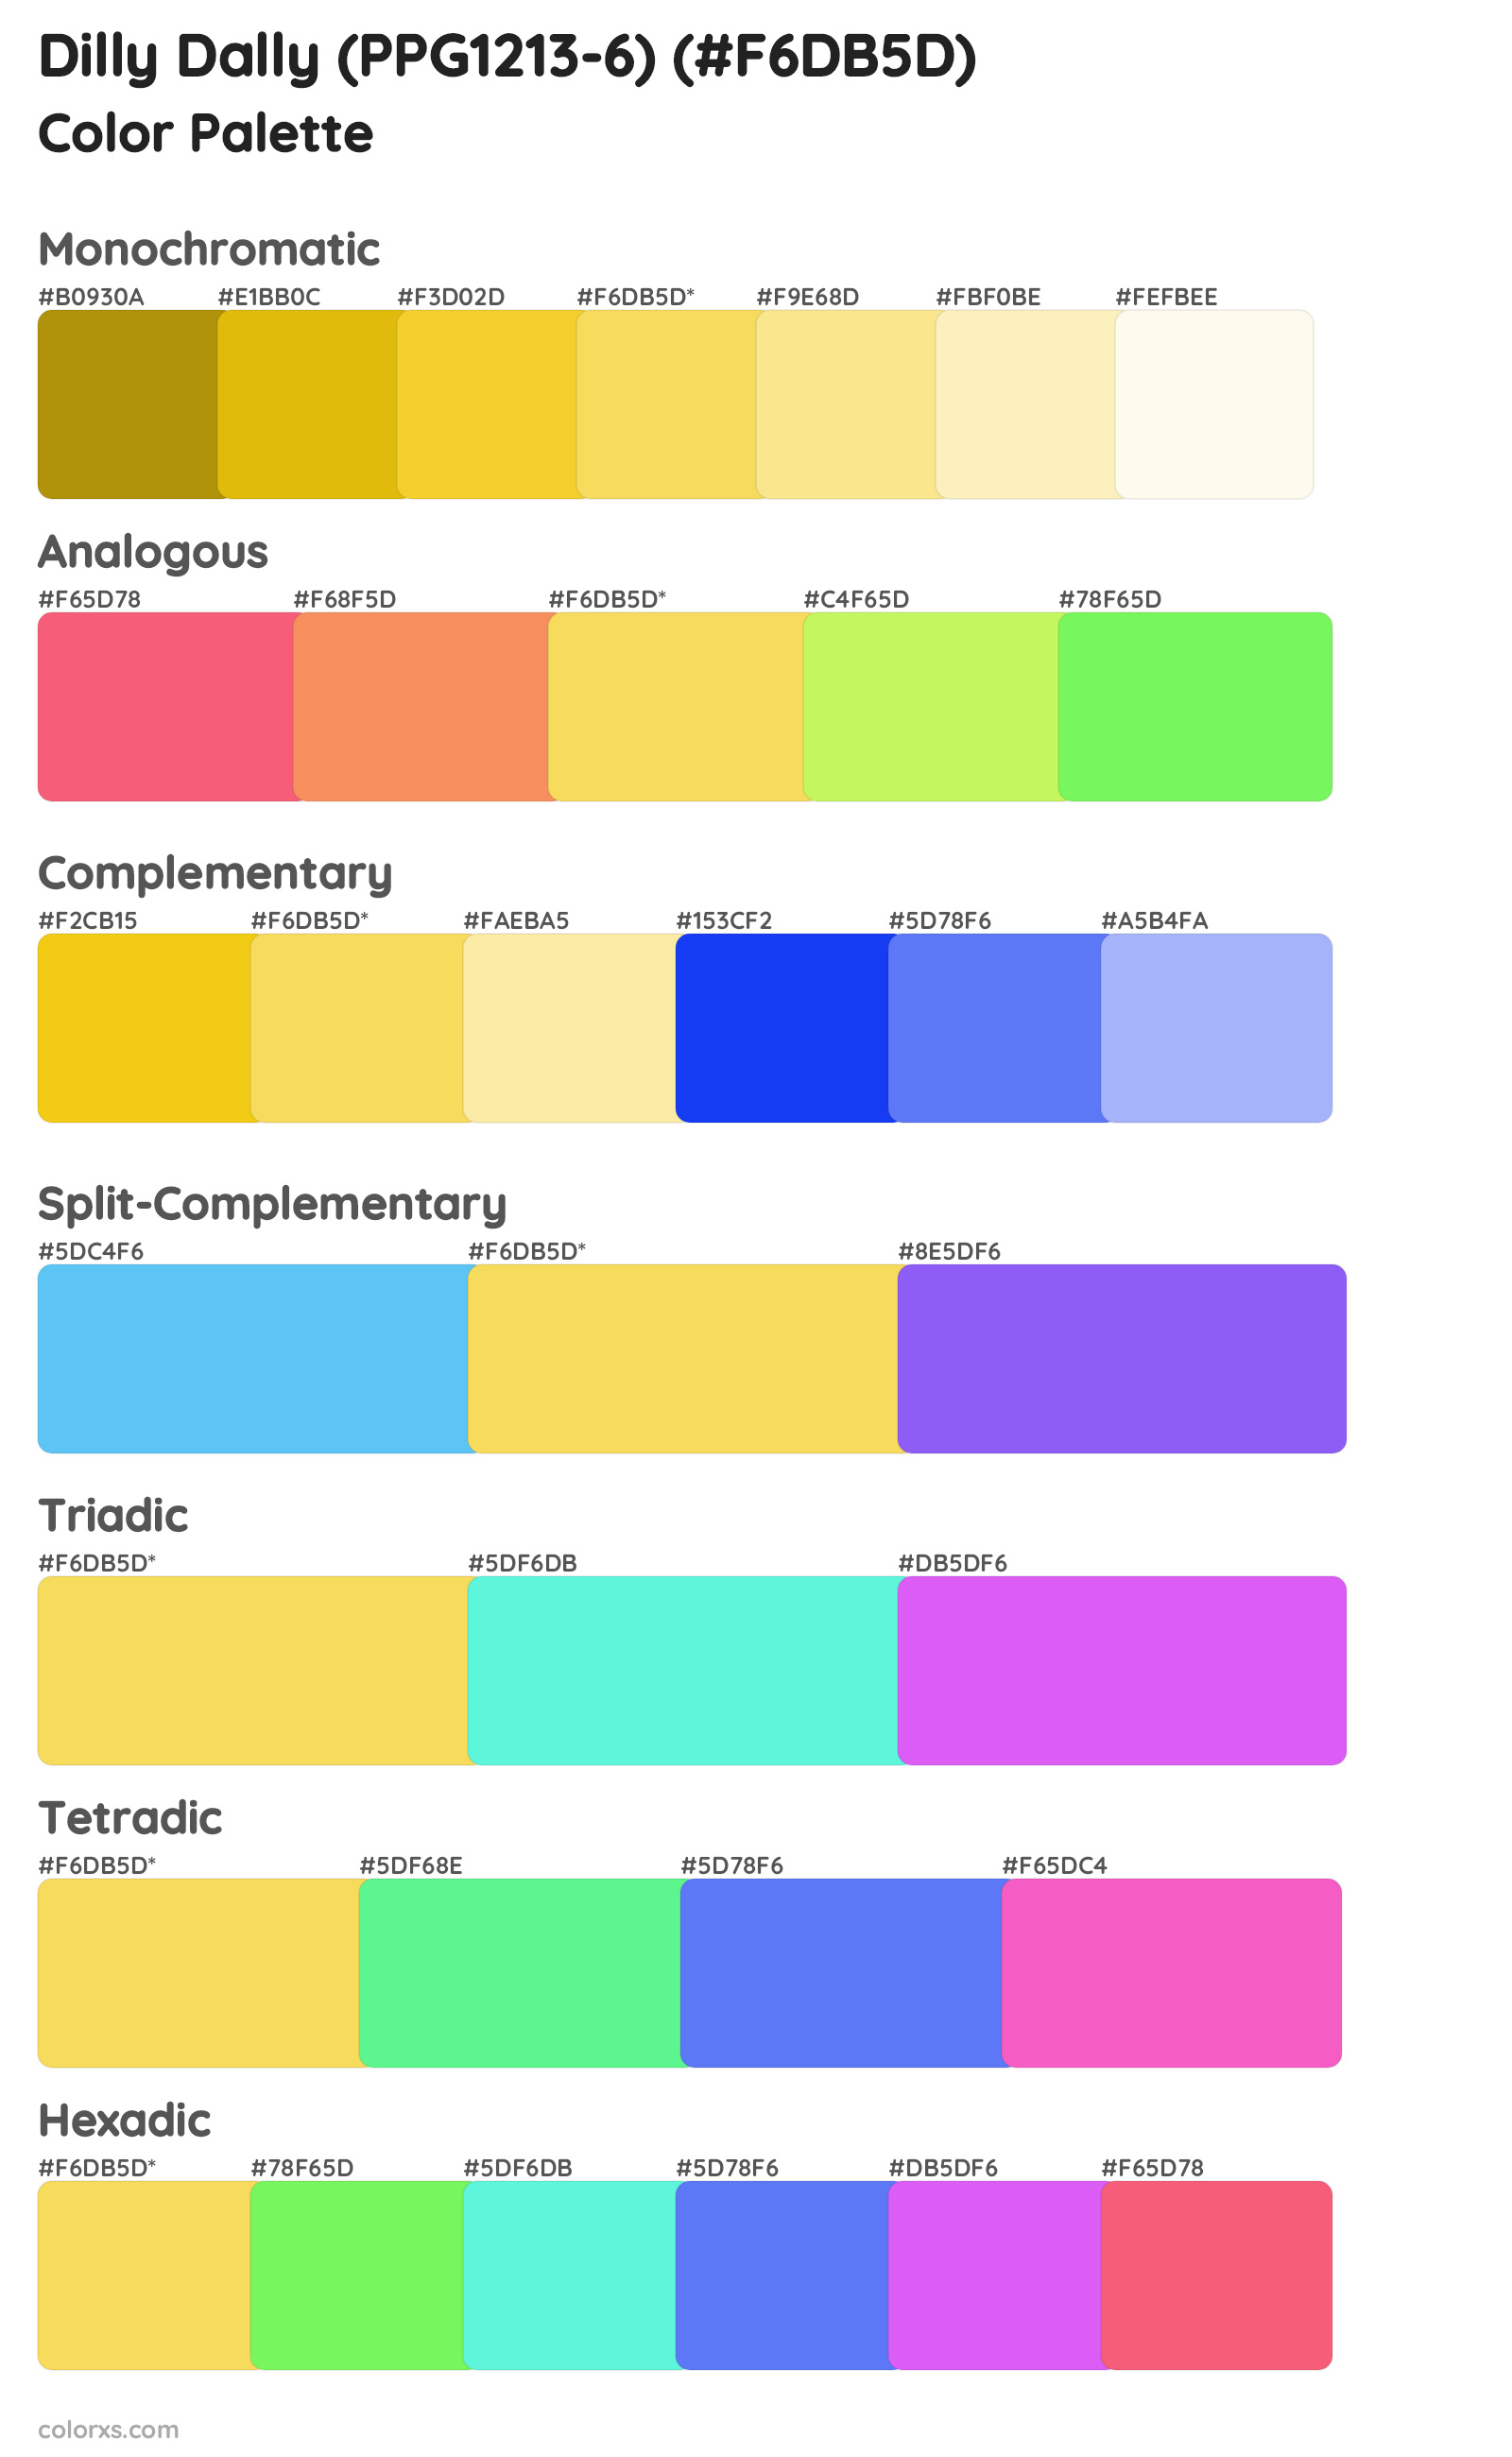 Dilly Dally (PPG1213-6) Color Scheme Palettes